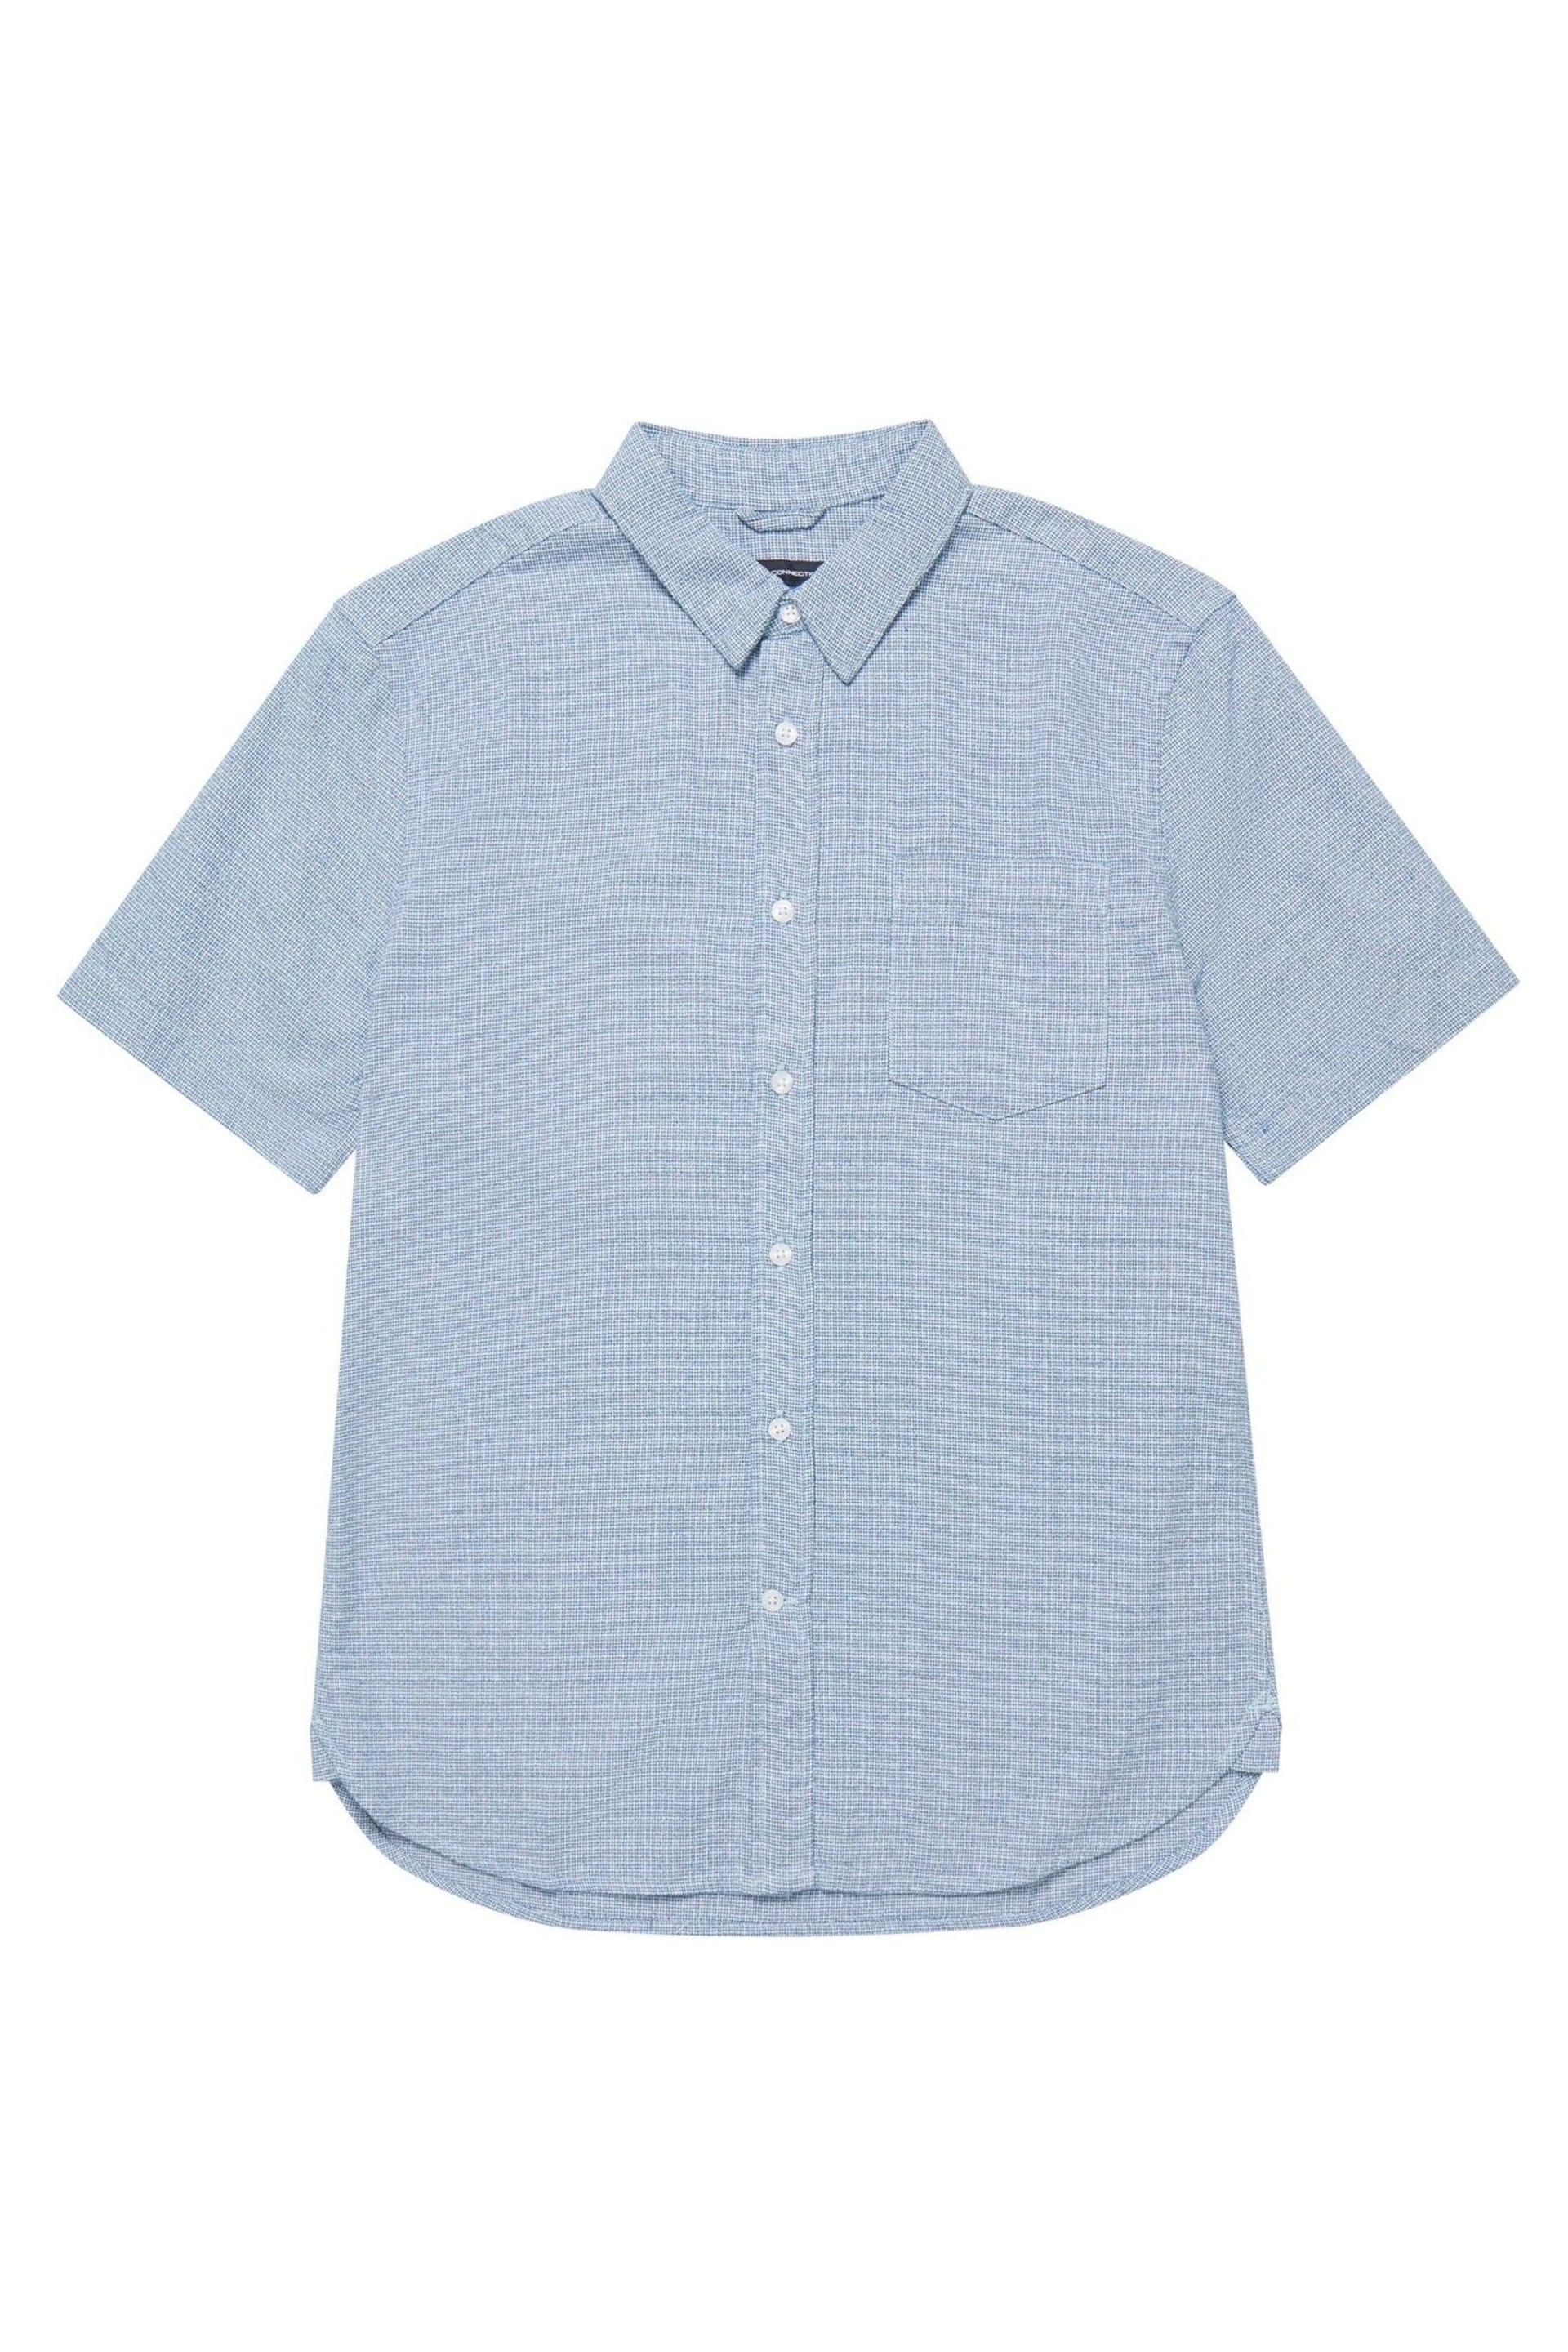 French Connection Dunster Micro Puppy Tooth Shirt - Image 4 of 4